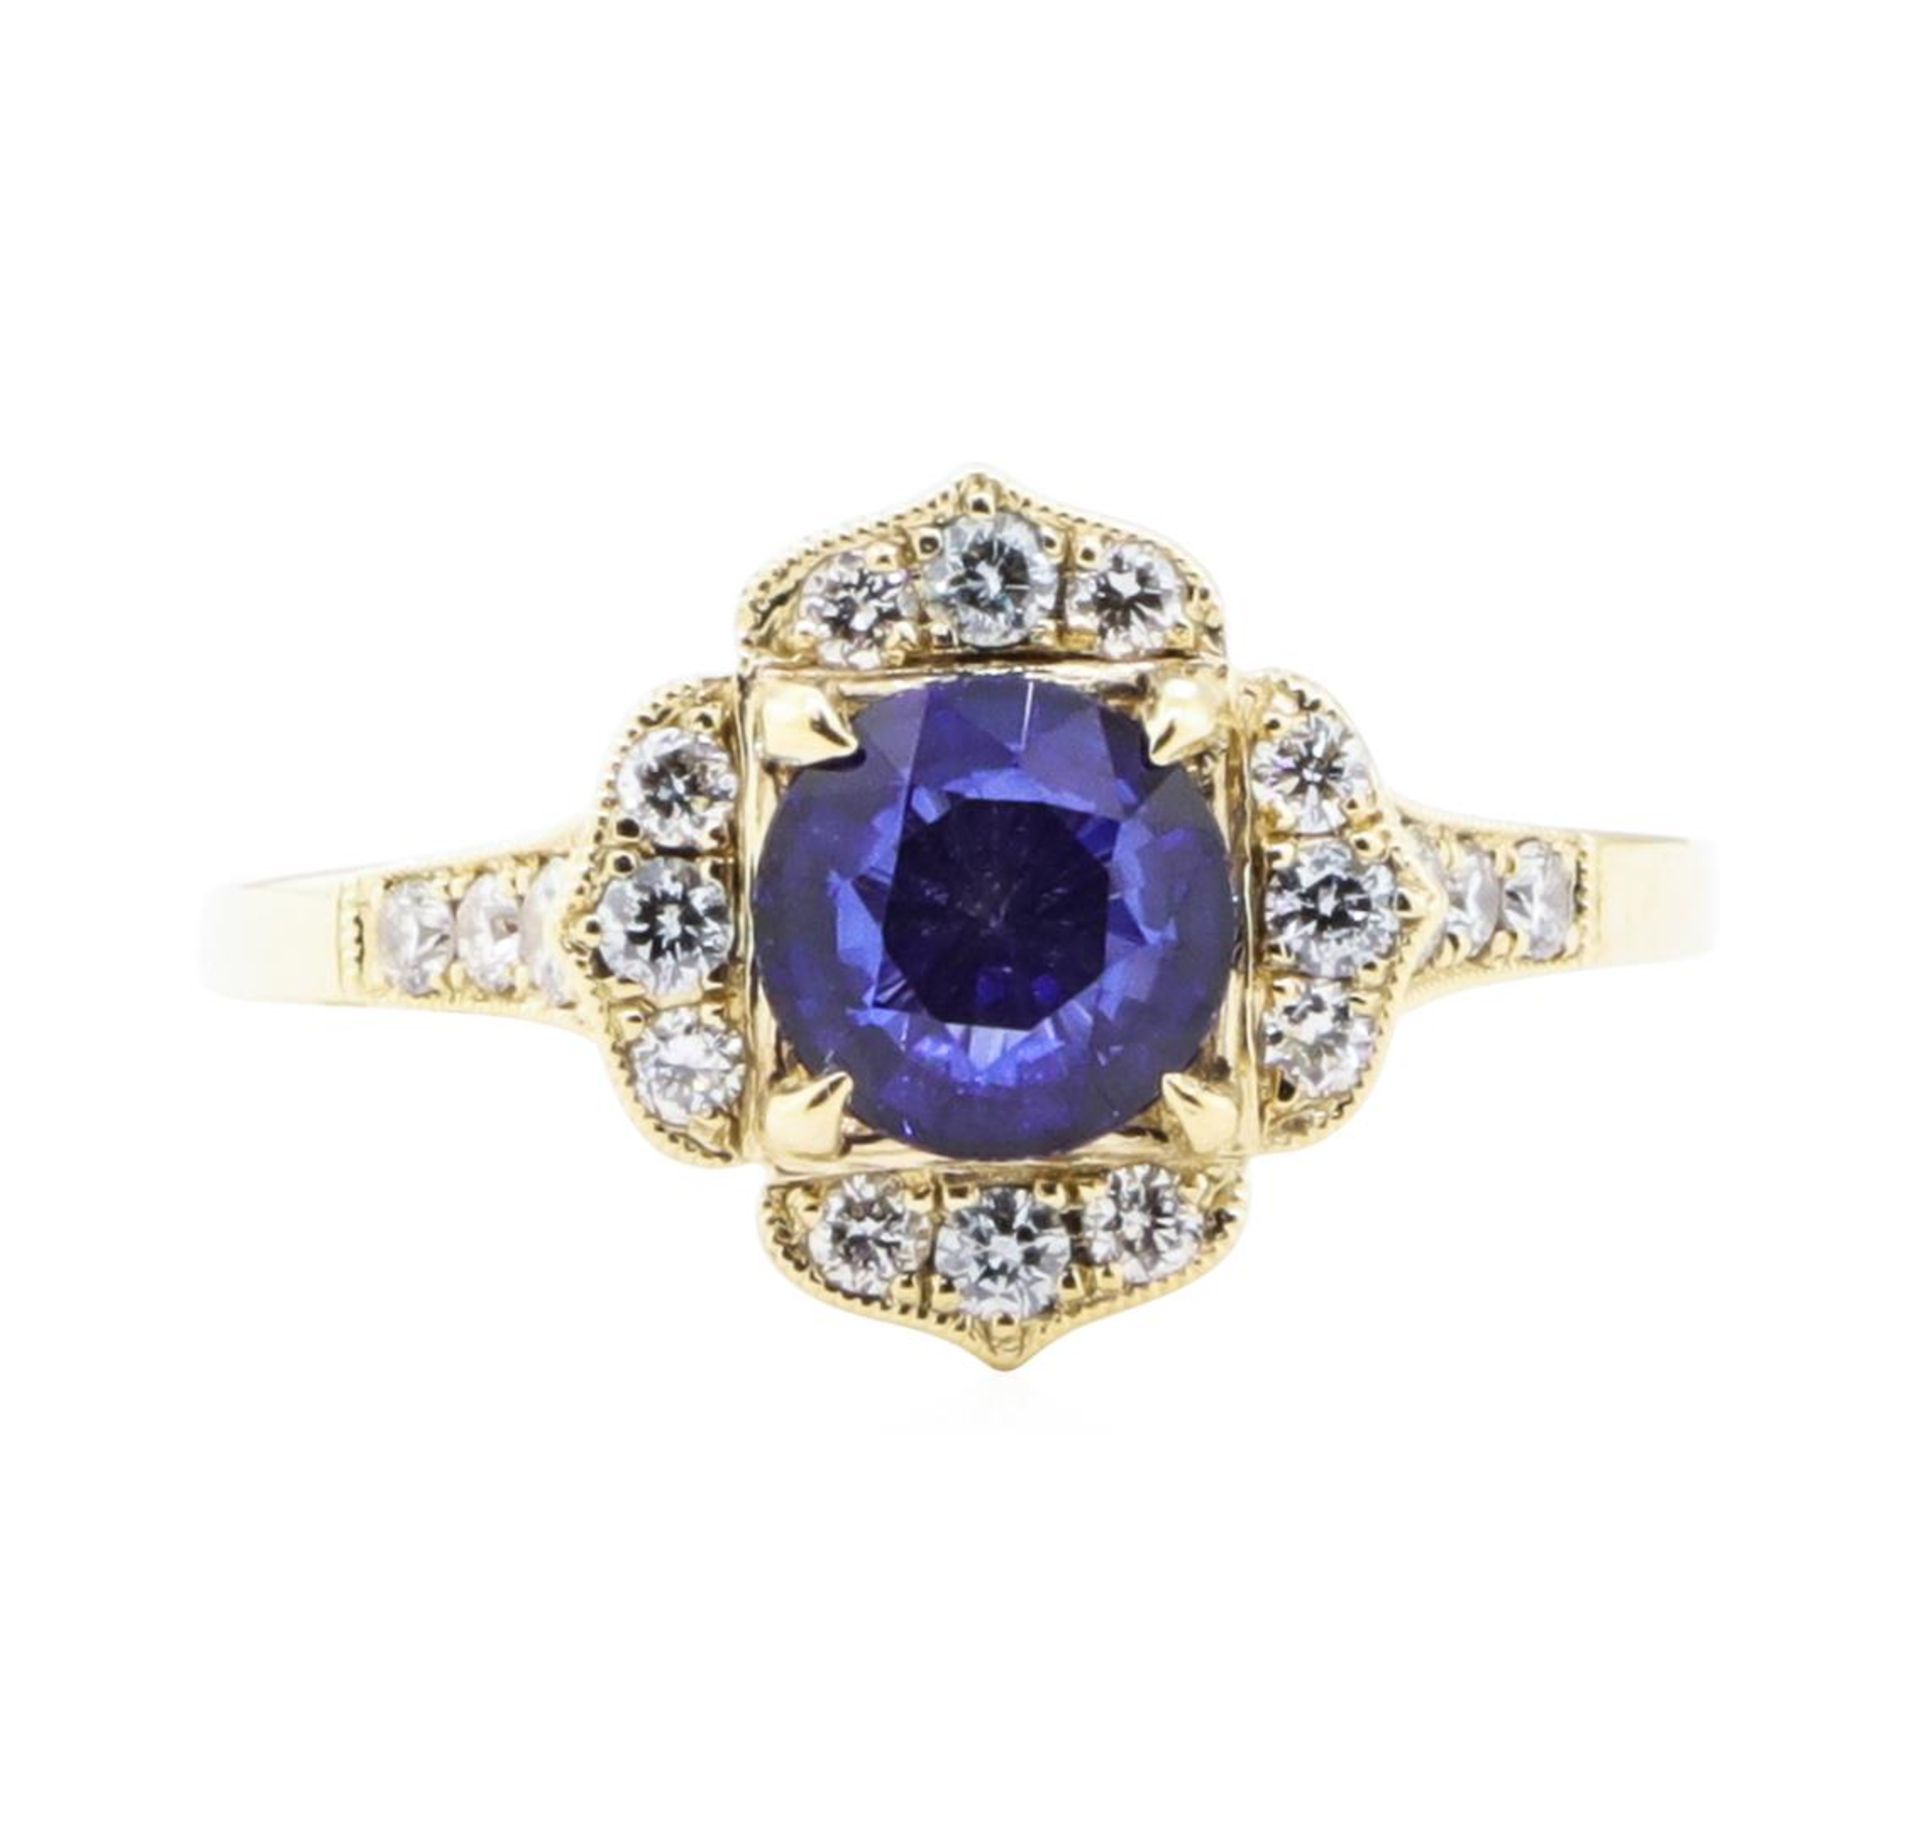 1.50 ctw Sapphire and Diamond Ring - 14KT Yellow Gold - Image 2 of 4